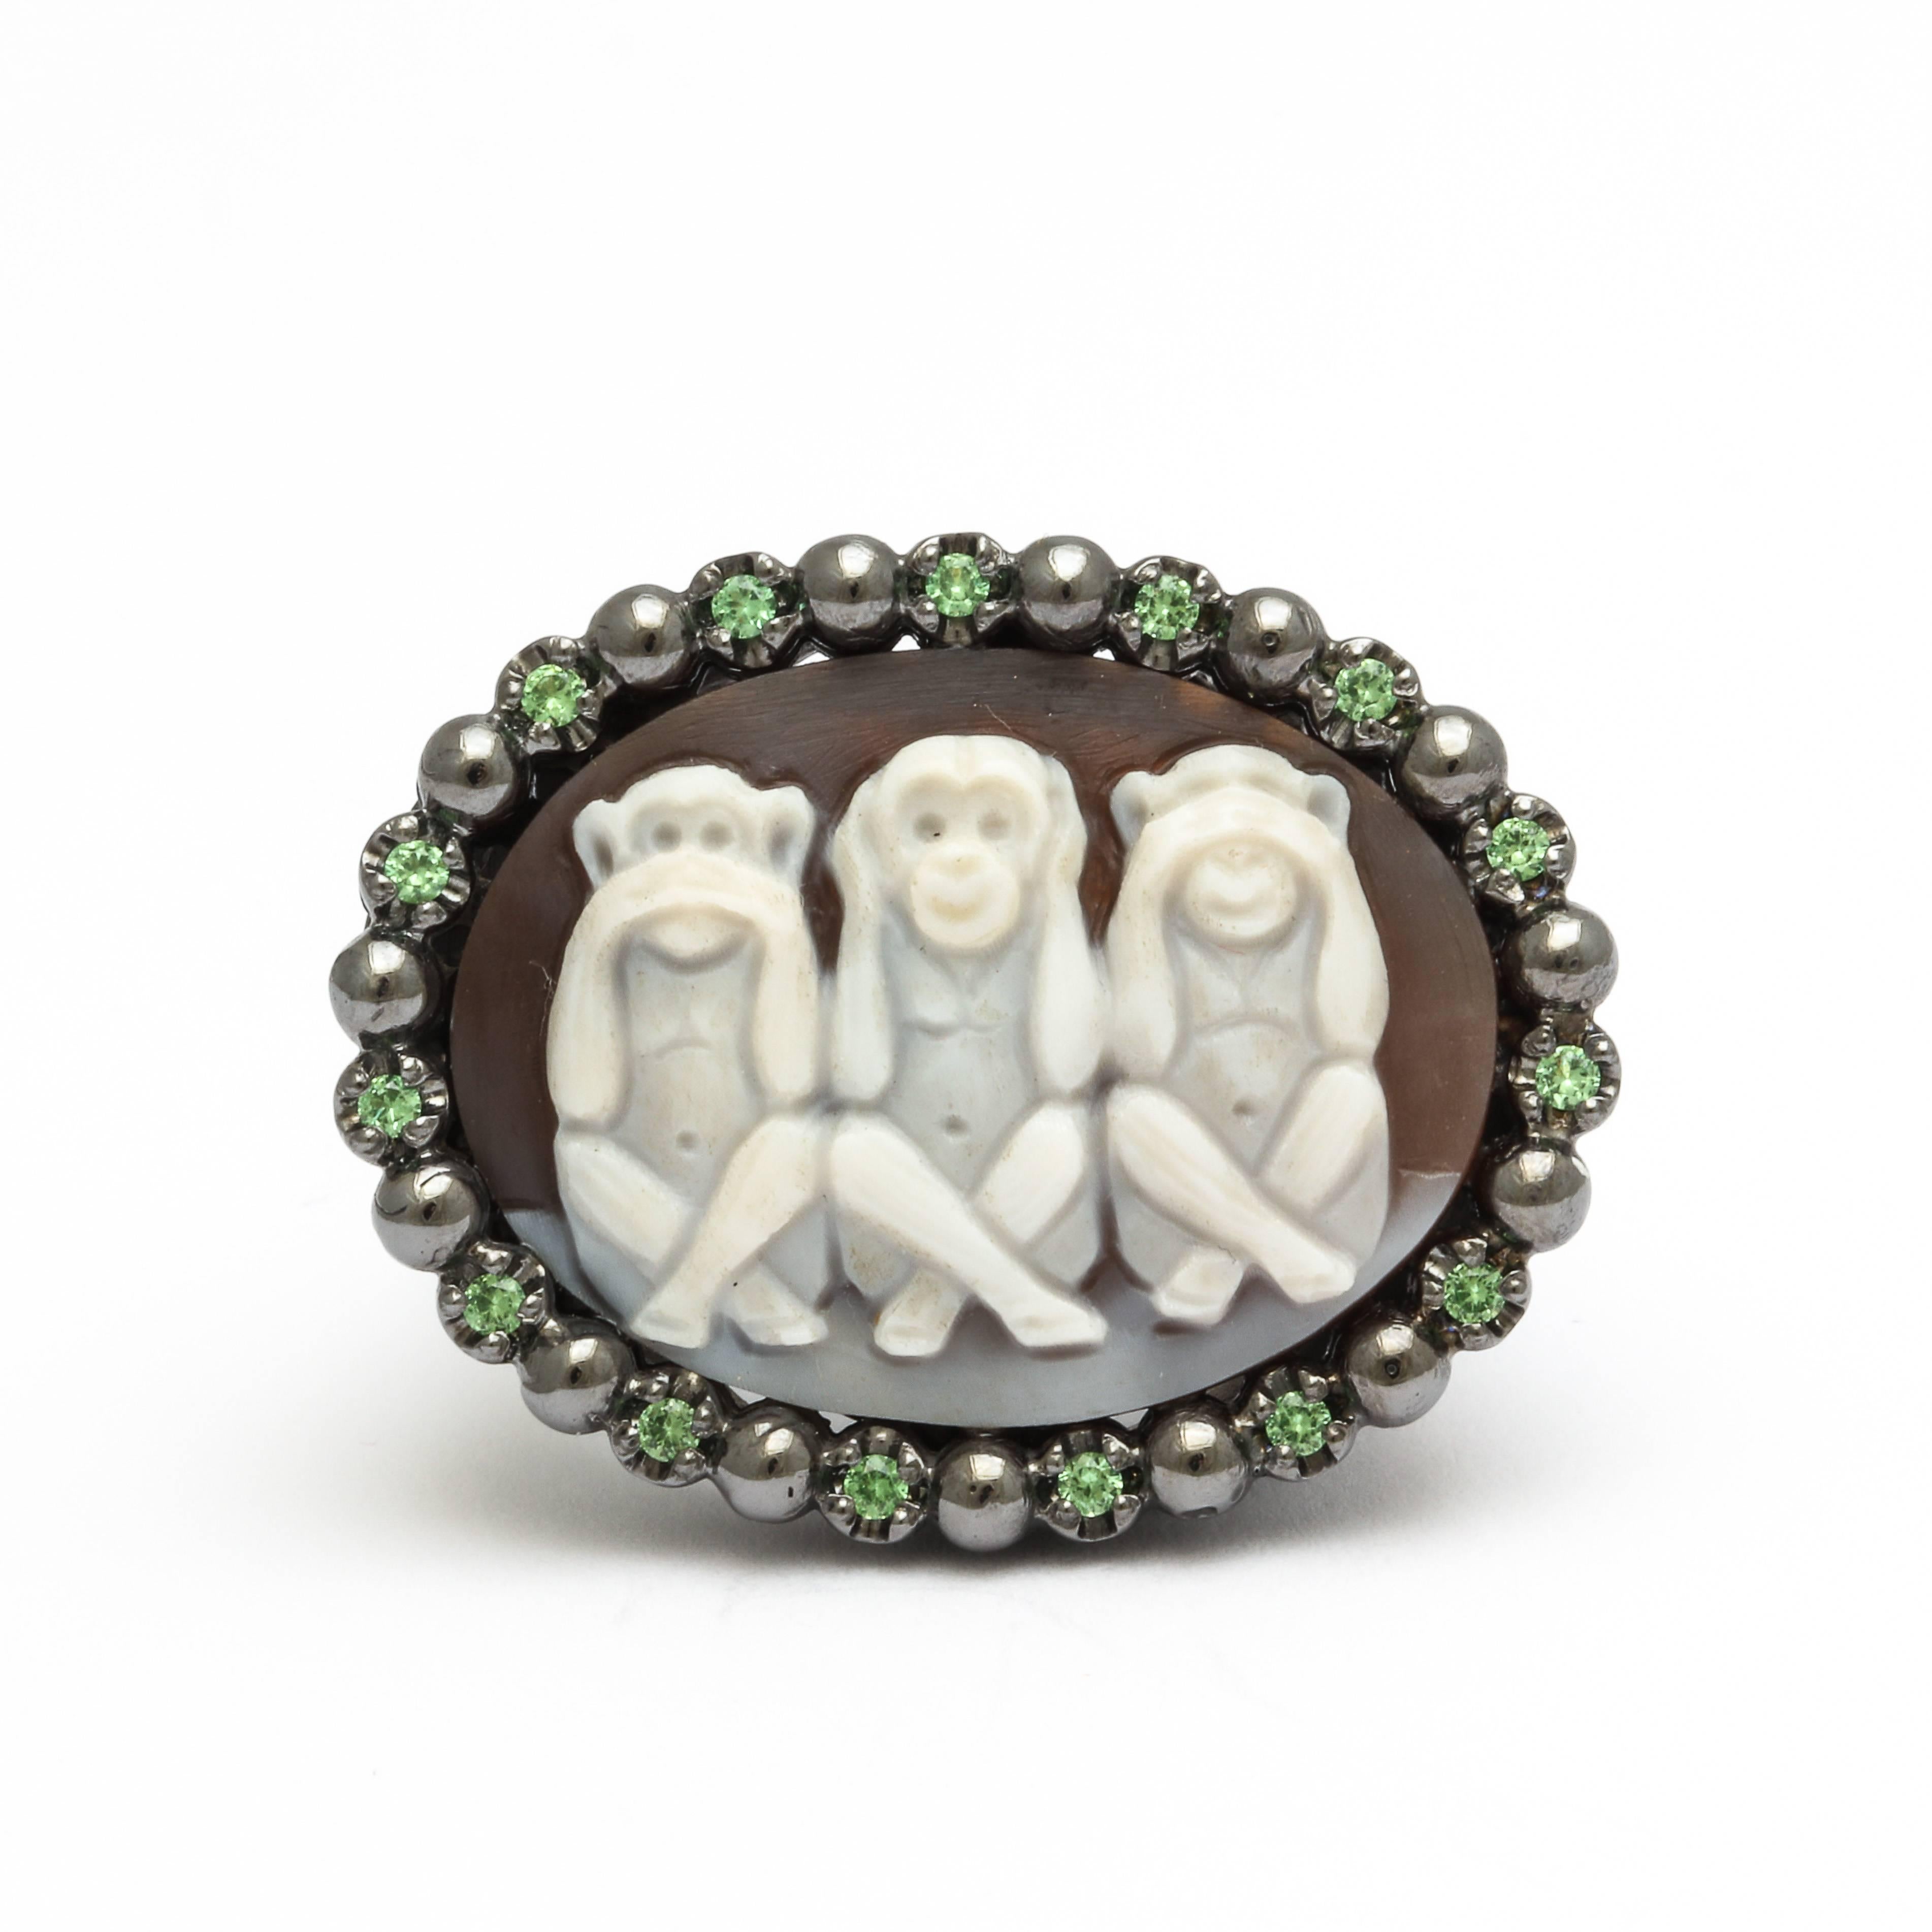 25mm sardonyx cameo hand-carved, set in sterling silver black rhodium plated ring with tsavorites.
Ring Size: 7.5US
*Being these are hand crafted one of a kind designs, not all ring sizes might be immediately available. We offer custom sizing free